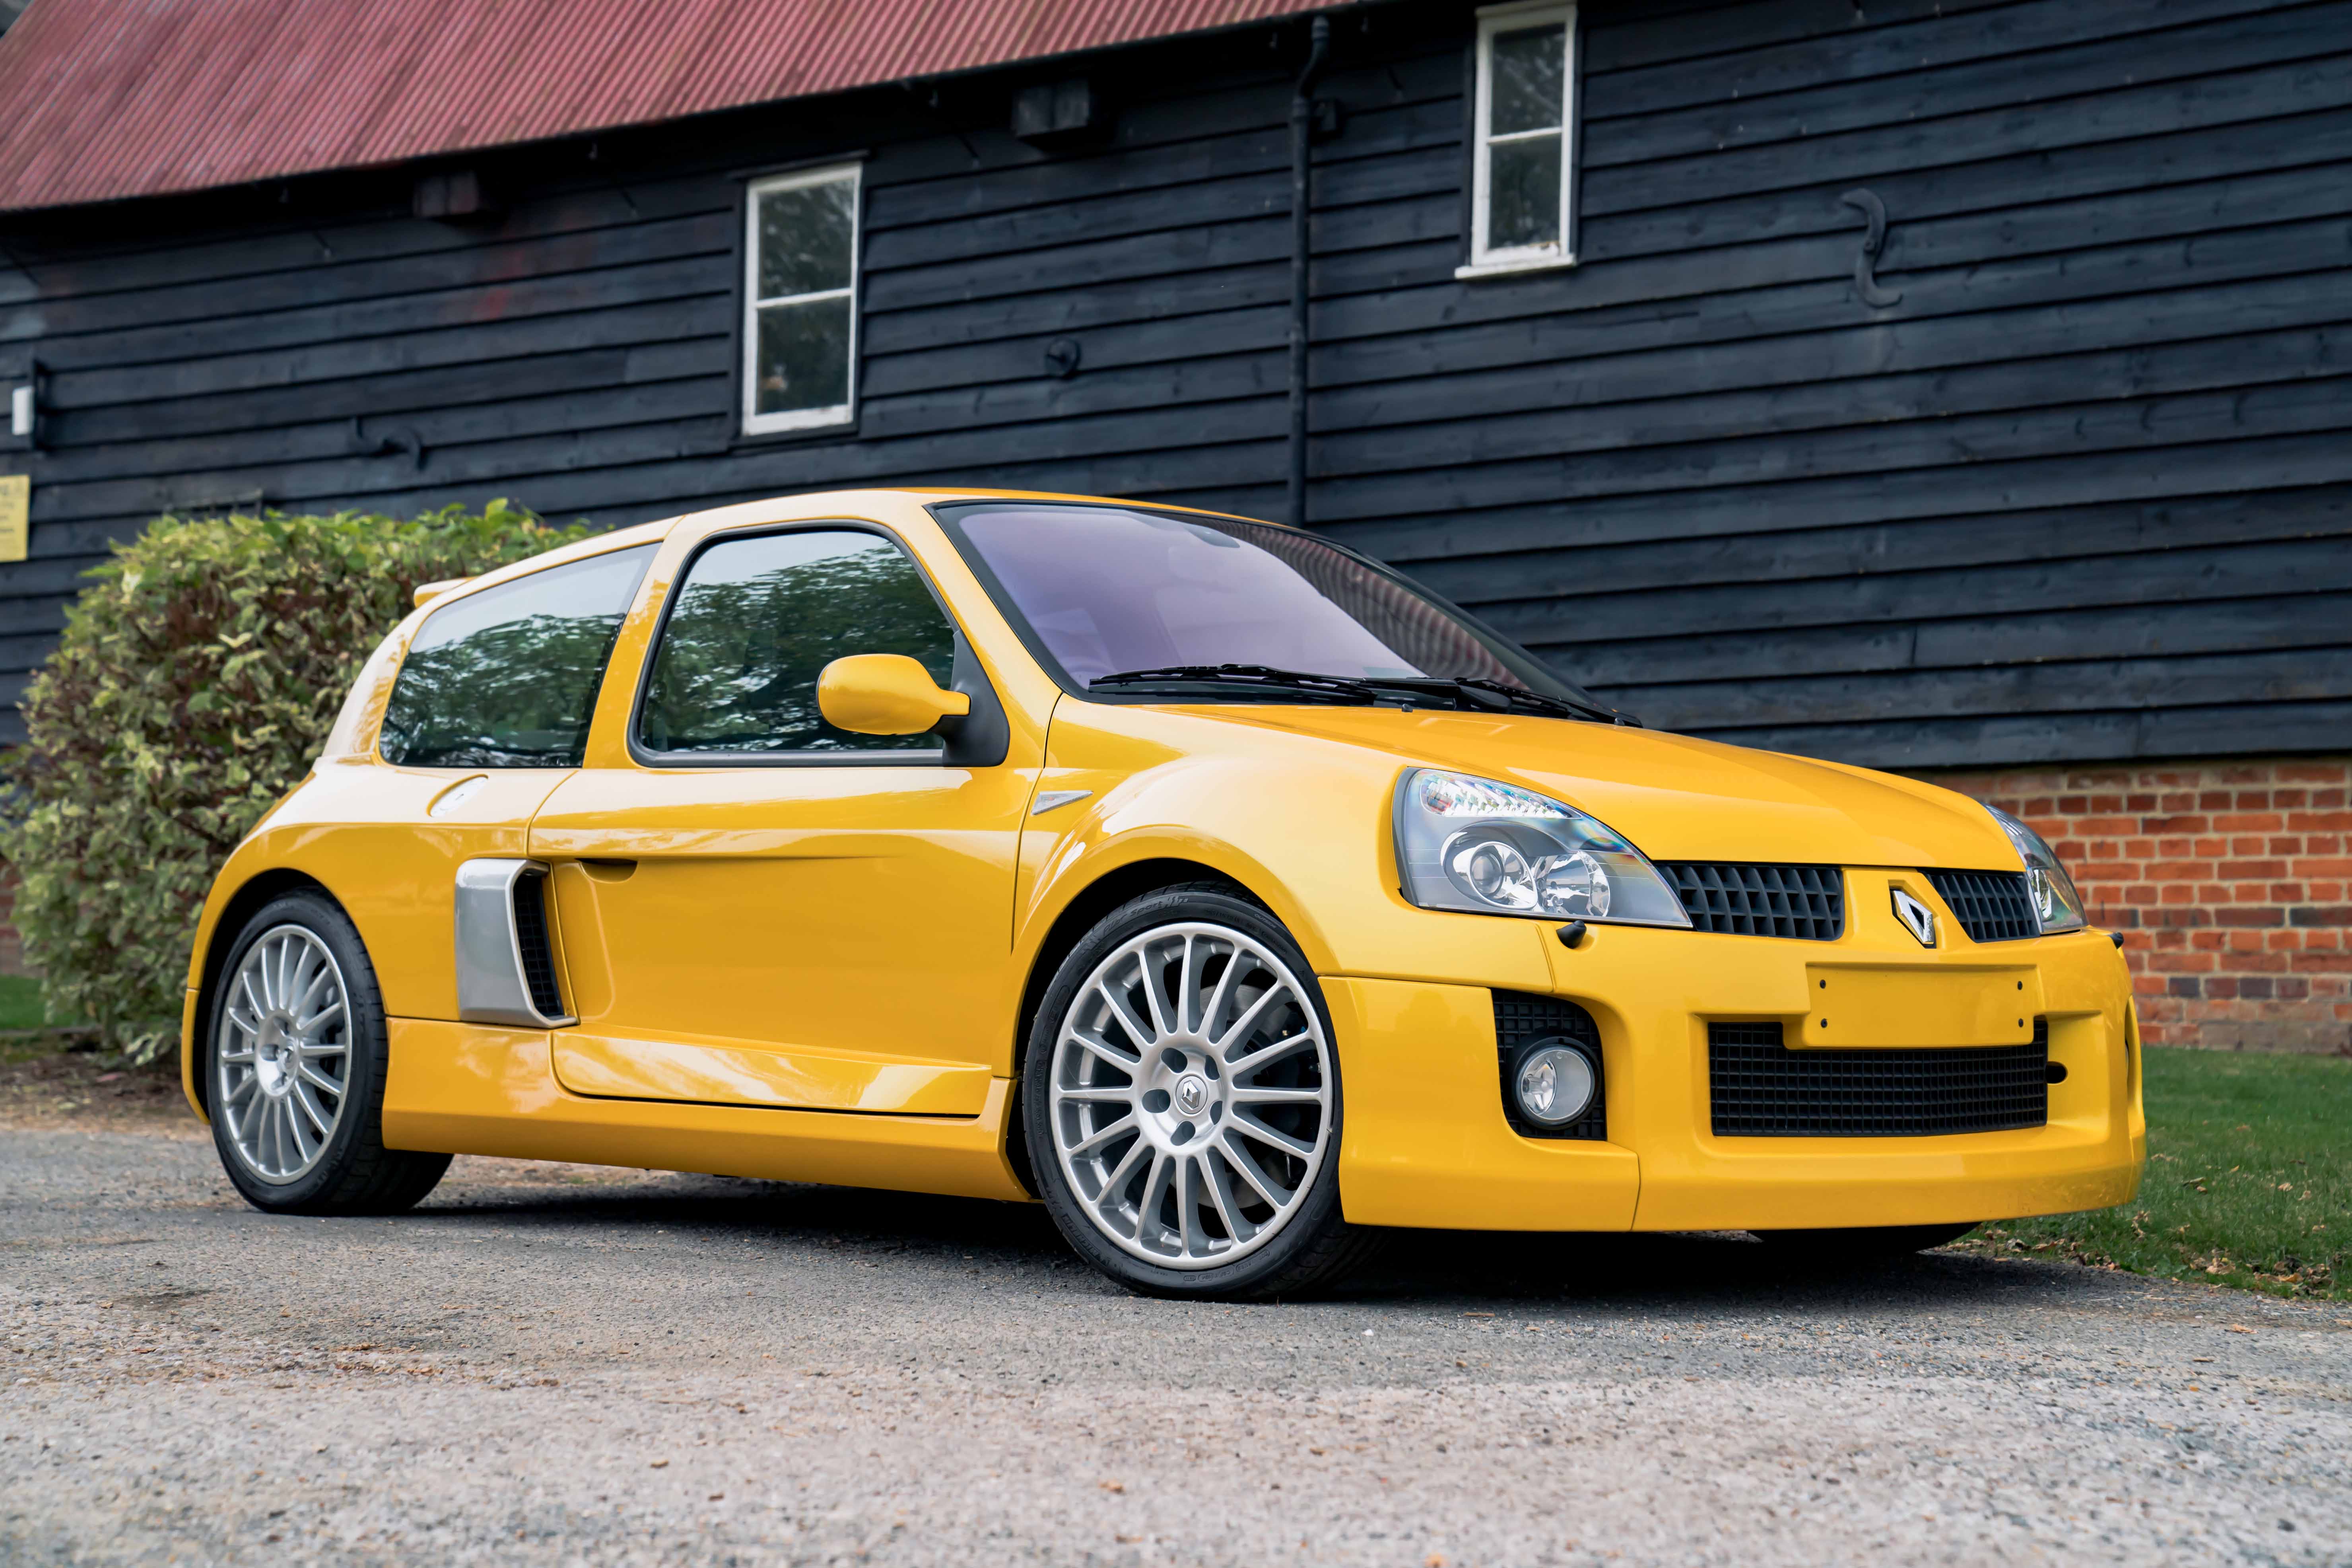 2005 RENAULT CLIO V6 PHASE 2 - 980 MILES for sale by auction in ...